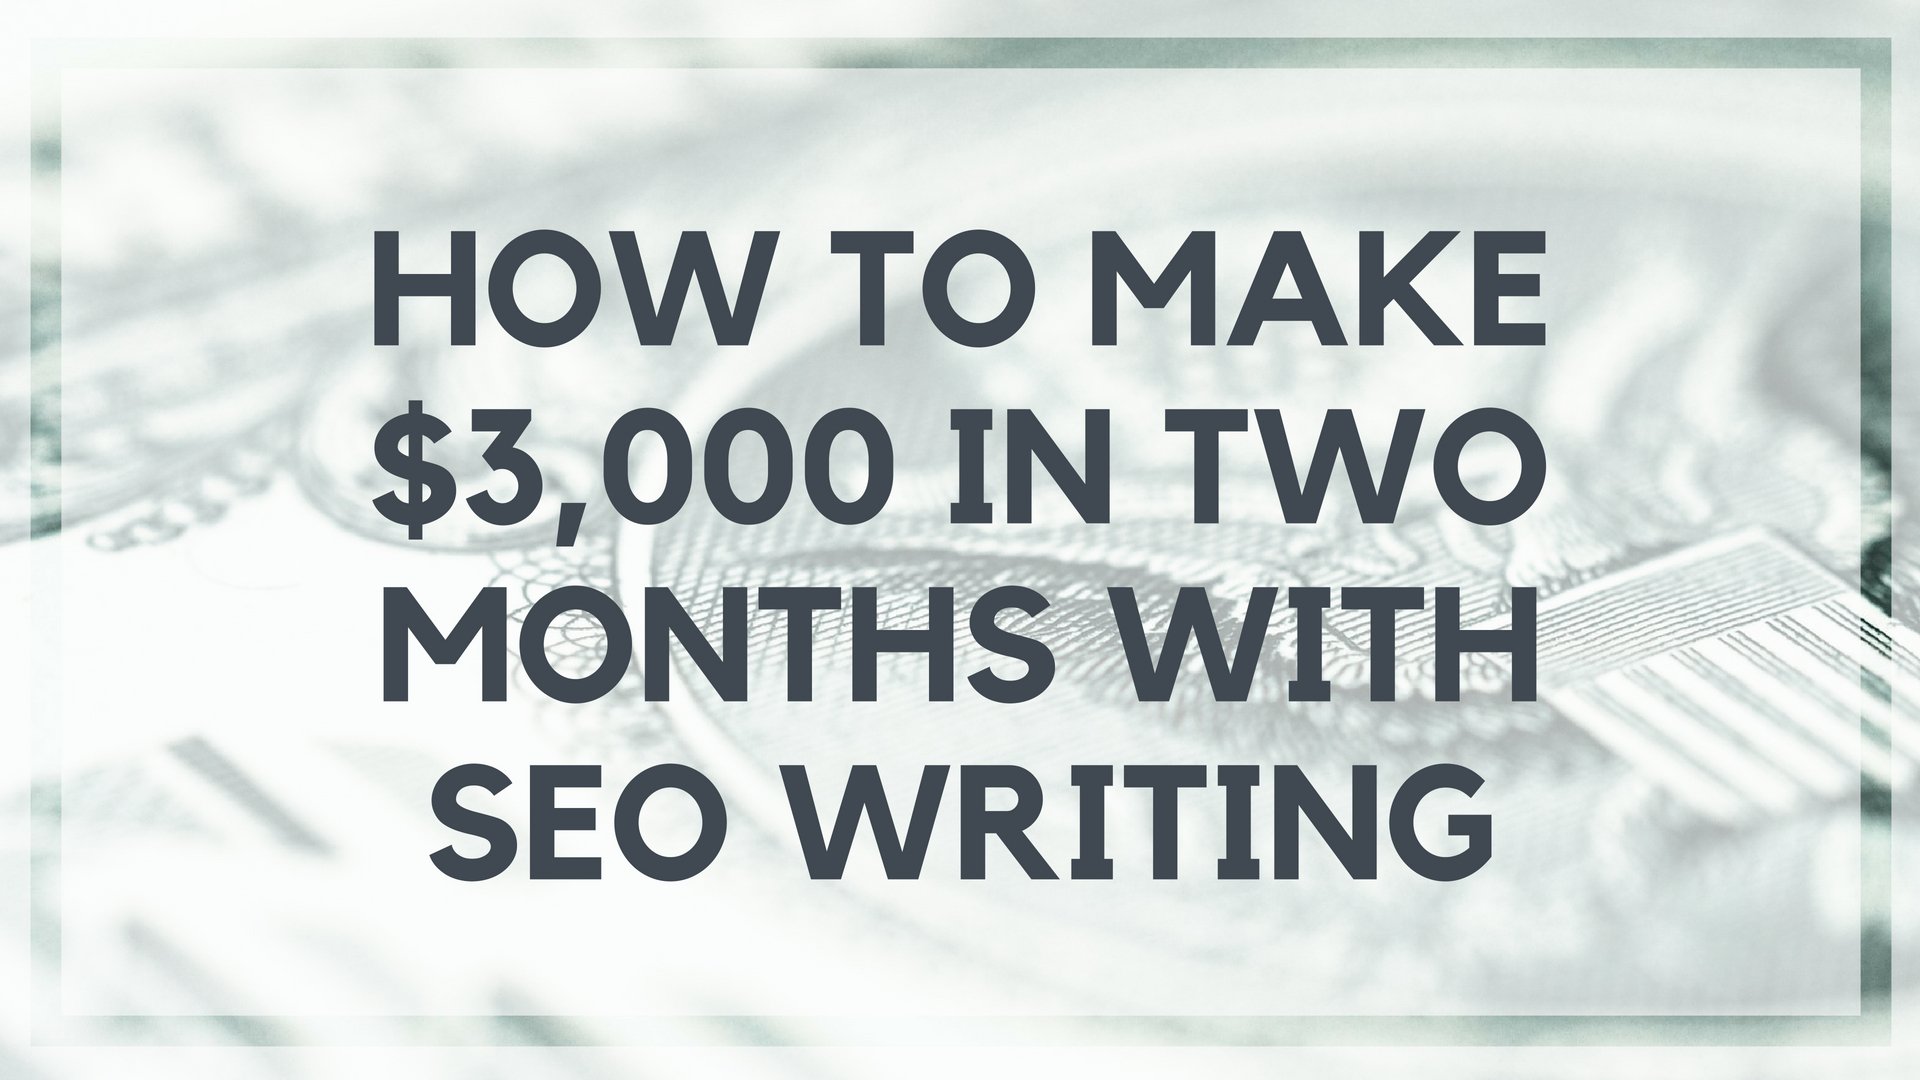 How to Make $3,000 in Two Months with SEO Writing